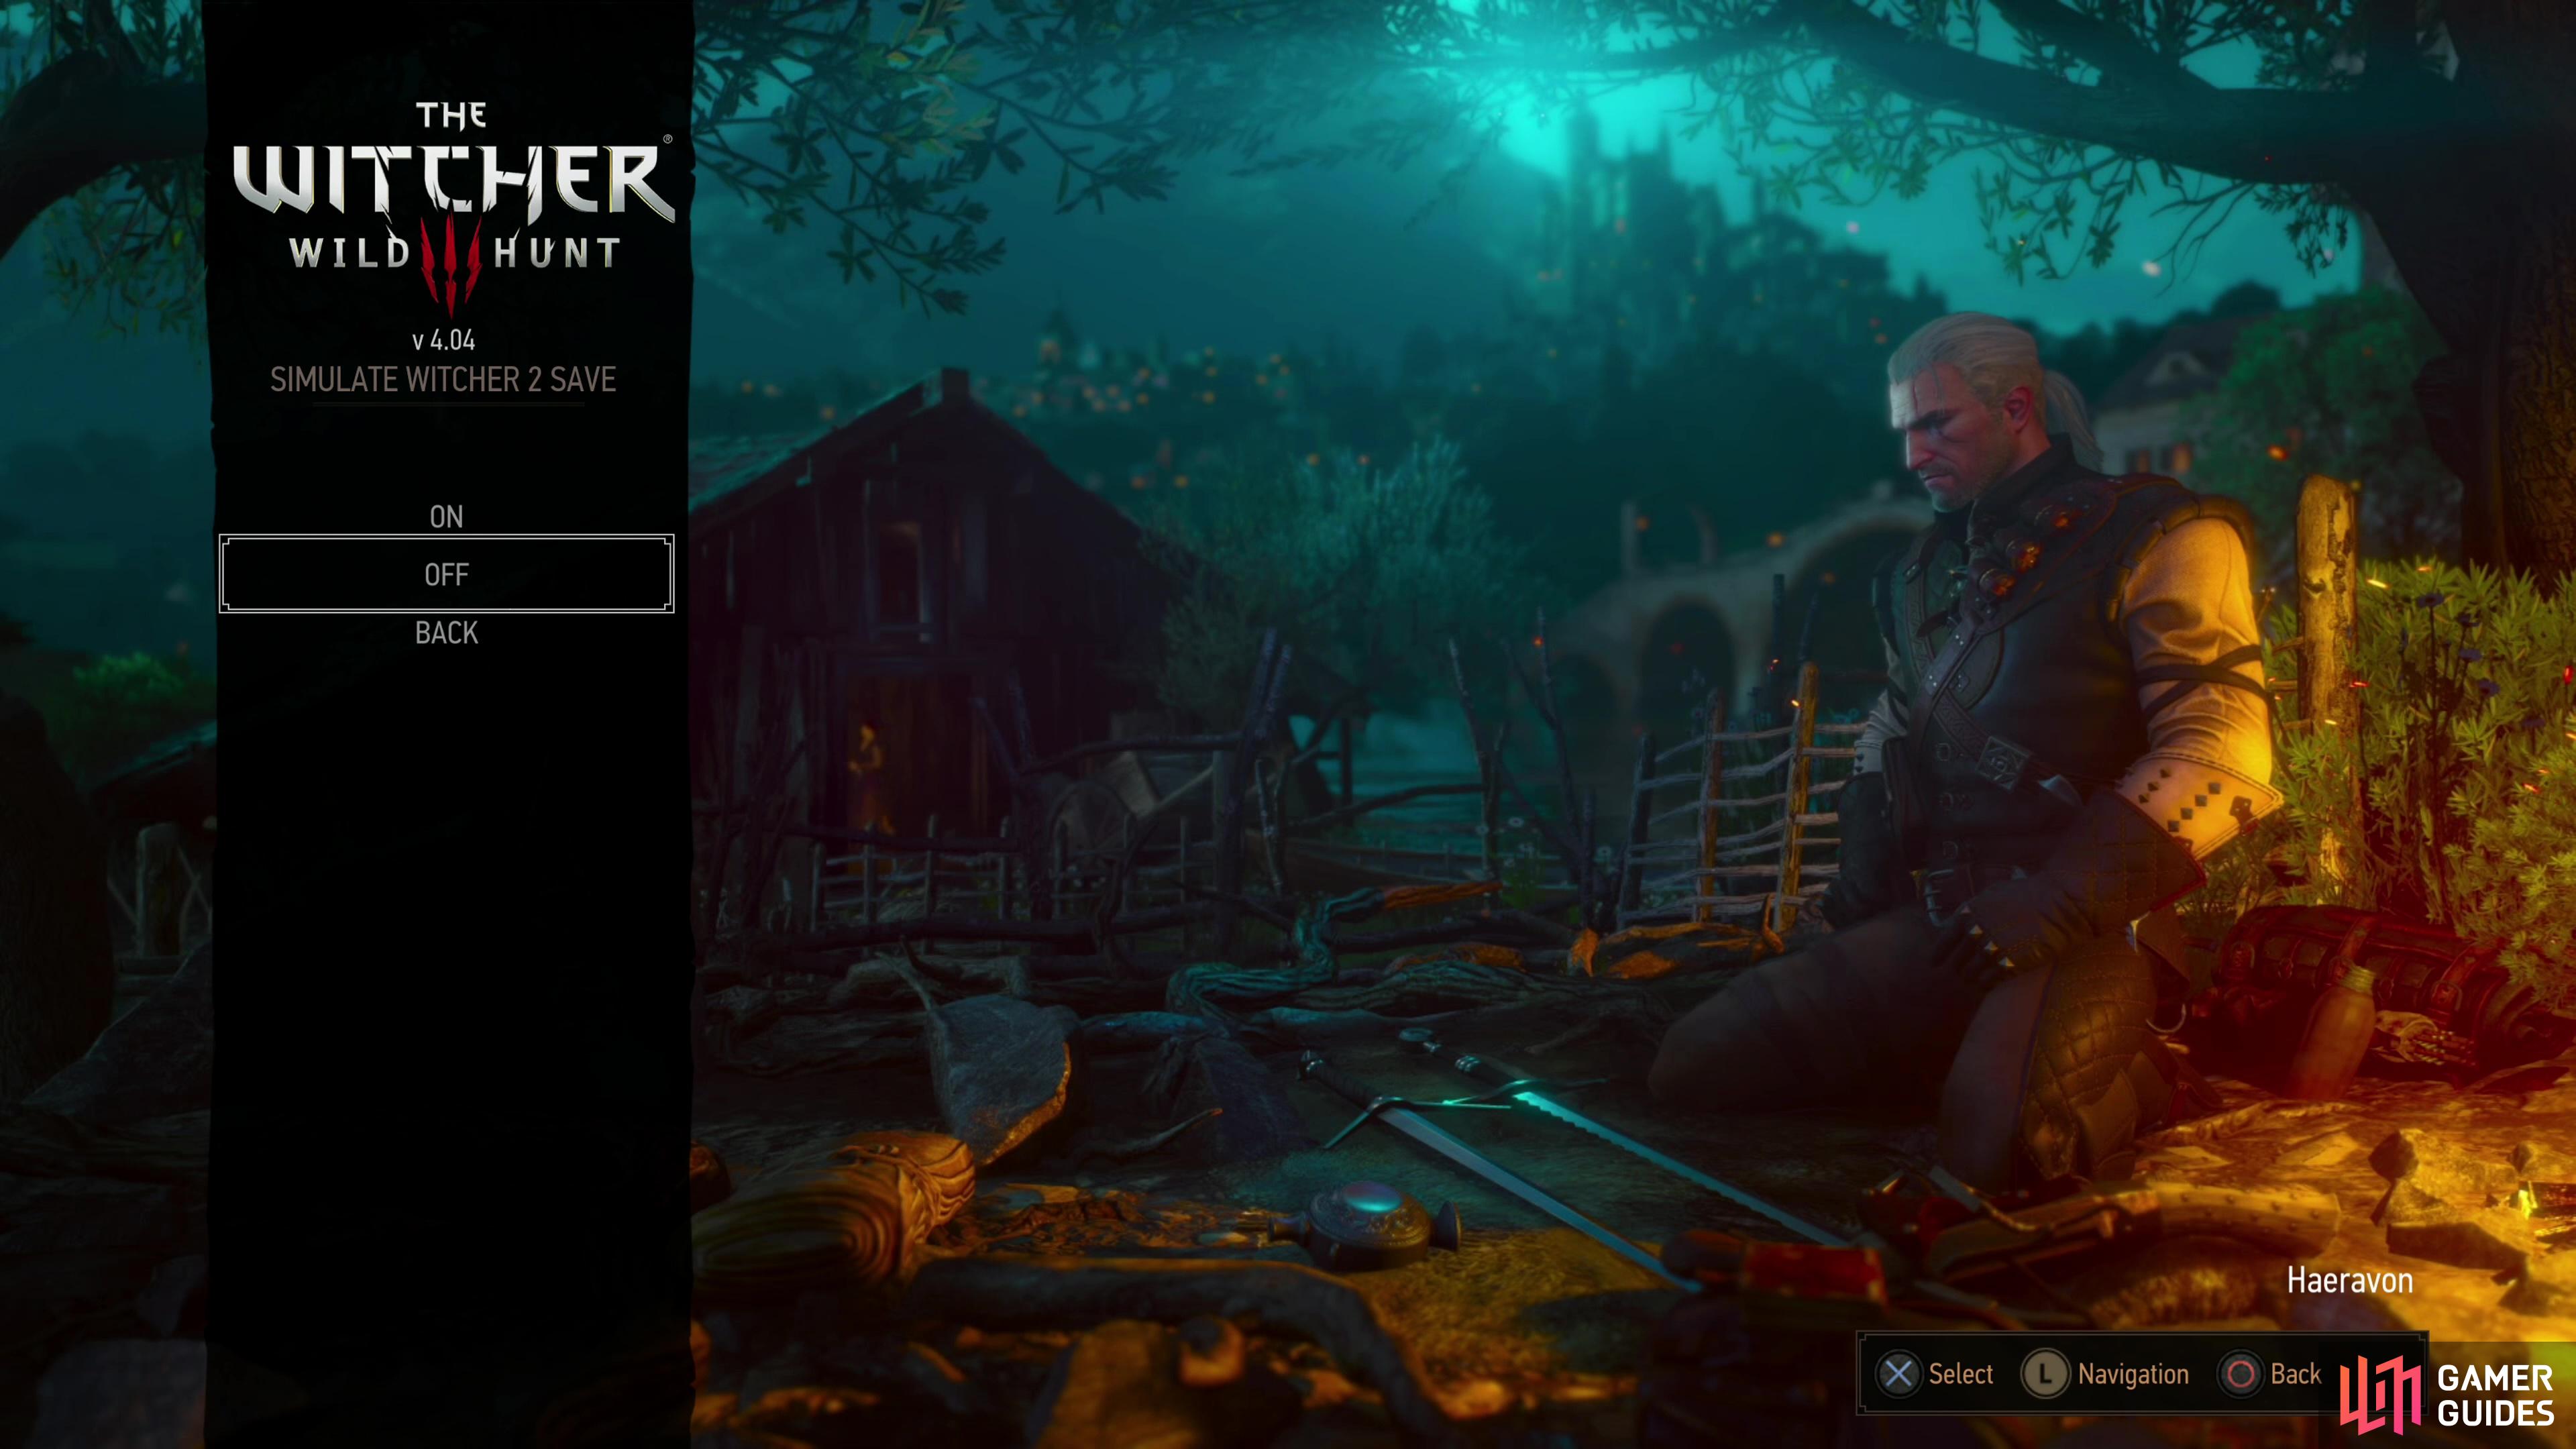 You can simulate a Witcher 2 save to set some of the choices made in the last game, or decline and you’ll get to pick these outcomes later in the game.